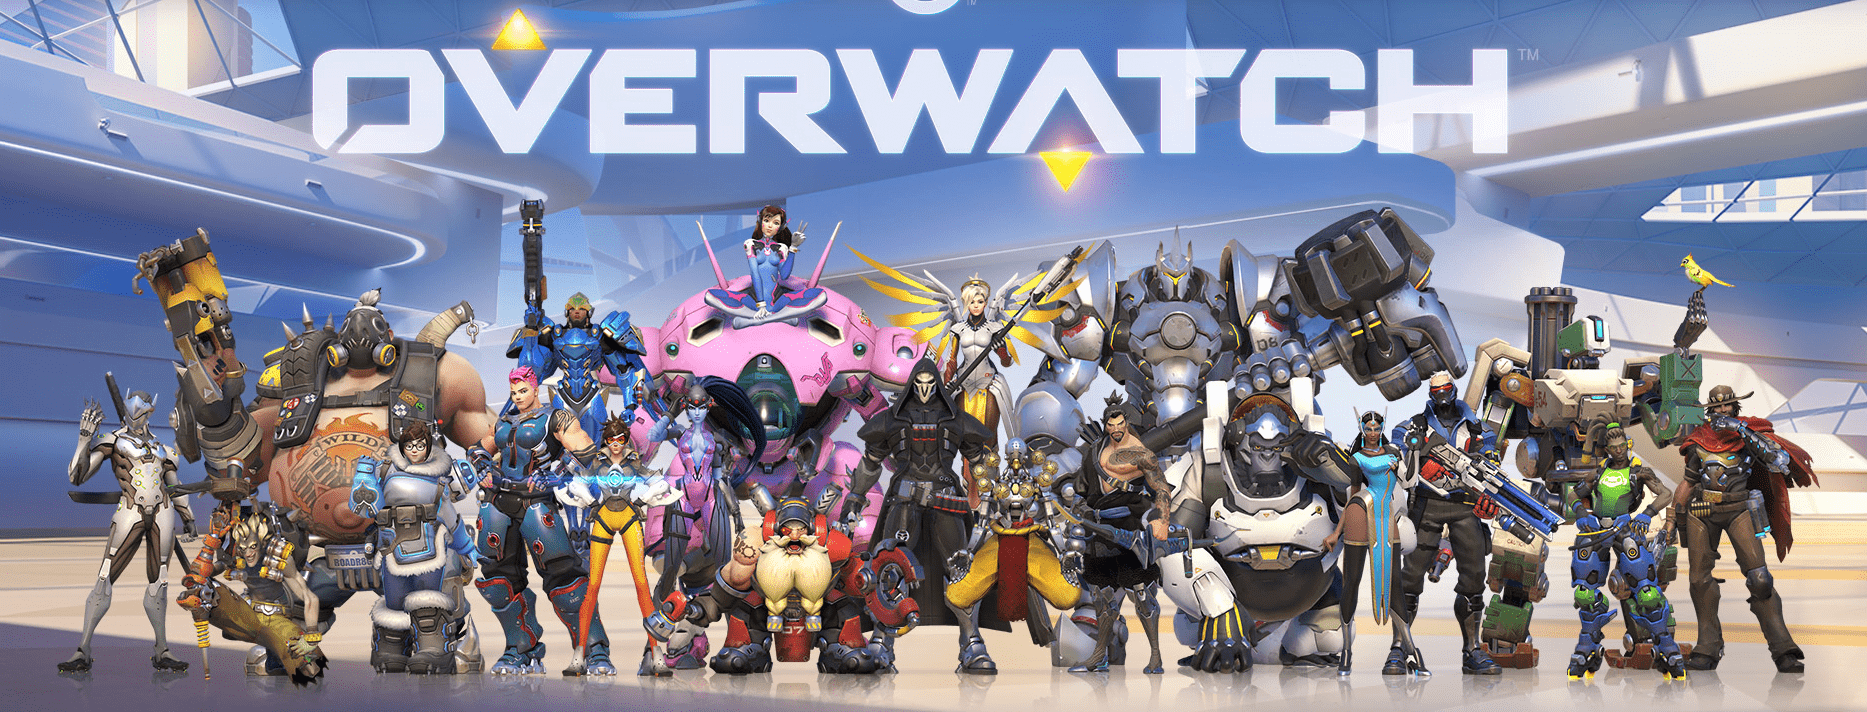 Overwatch PC Full Version Free Download